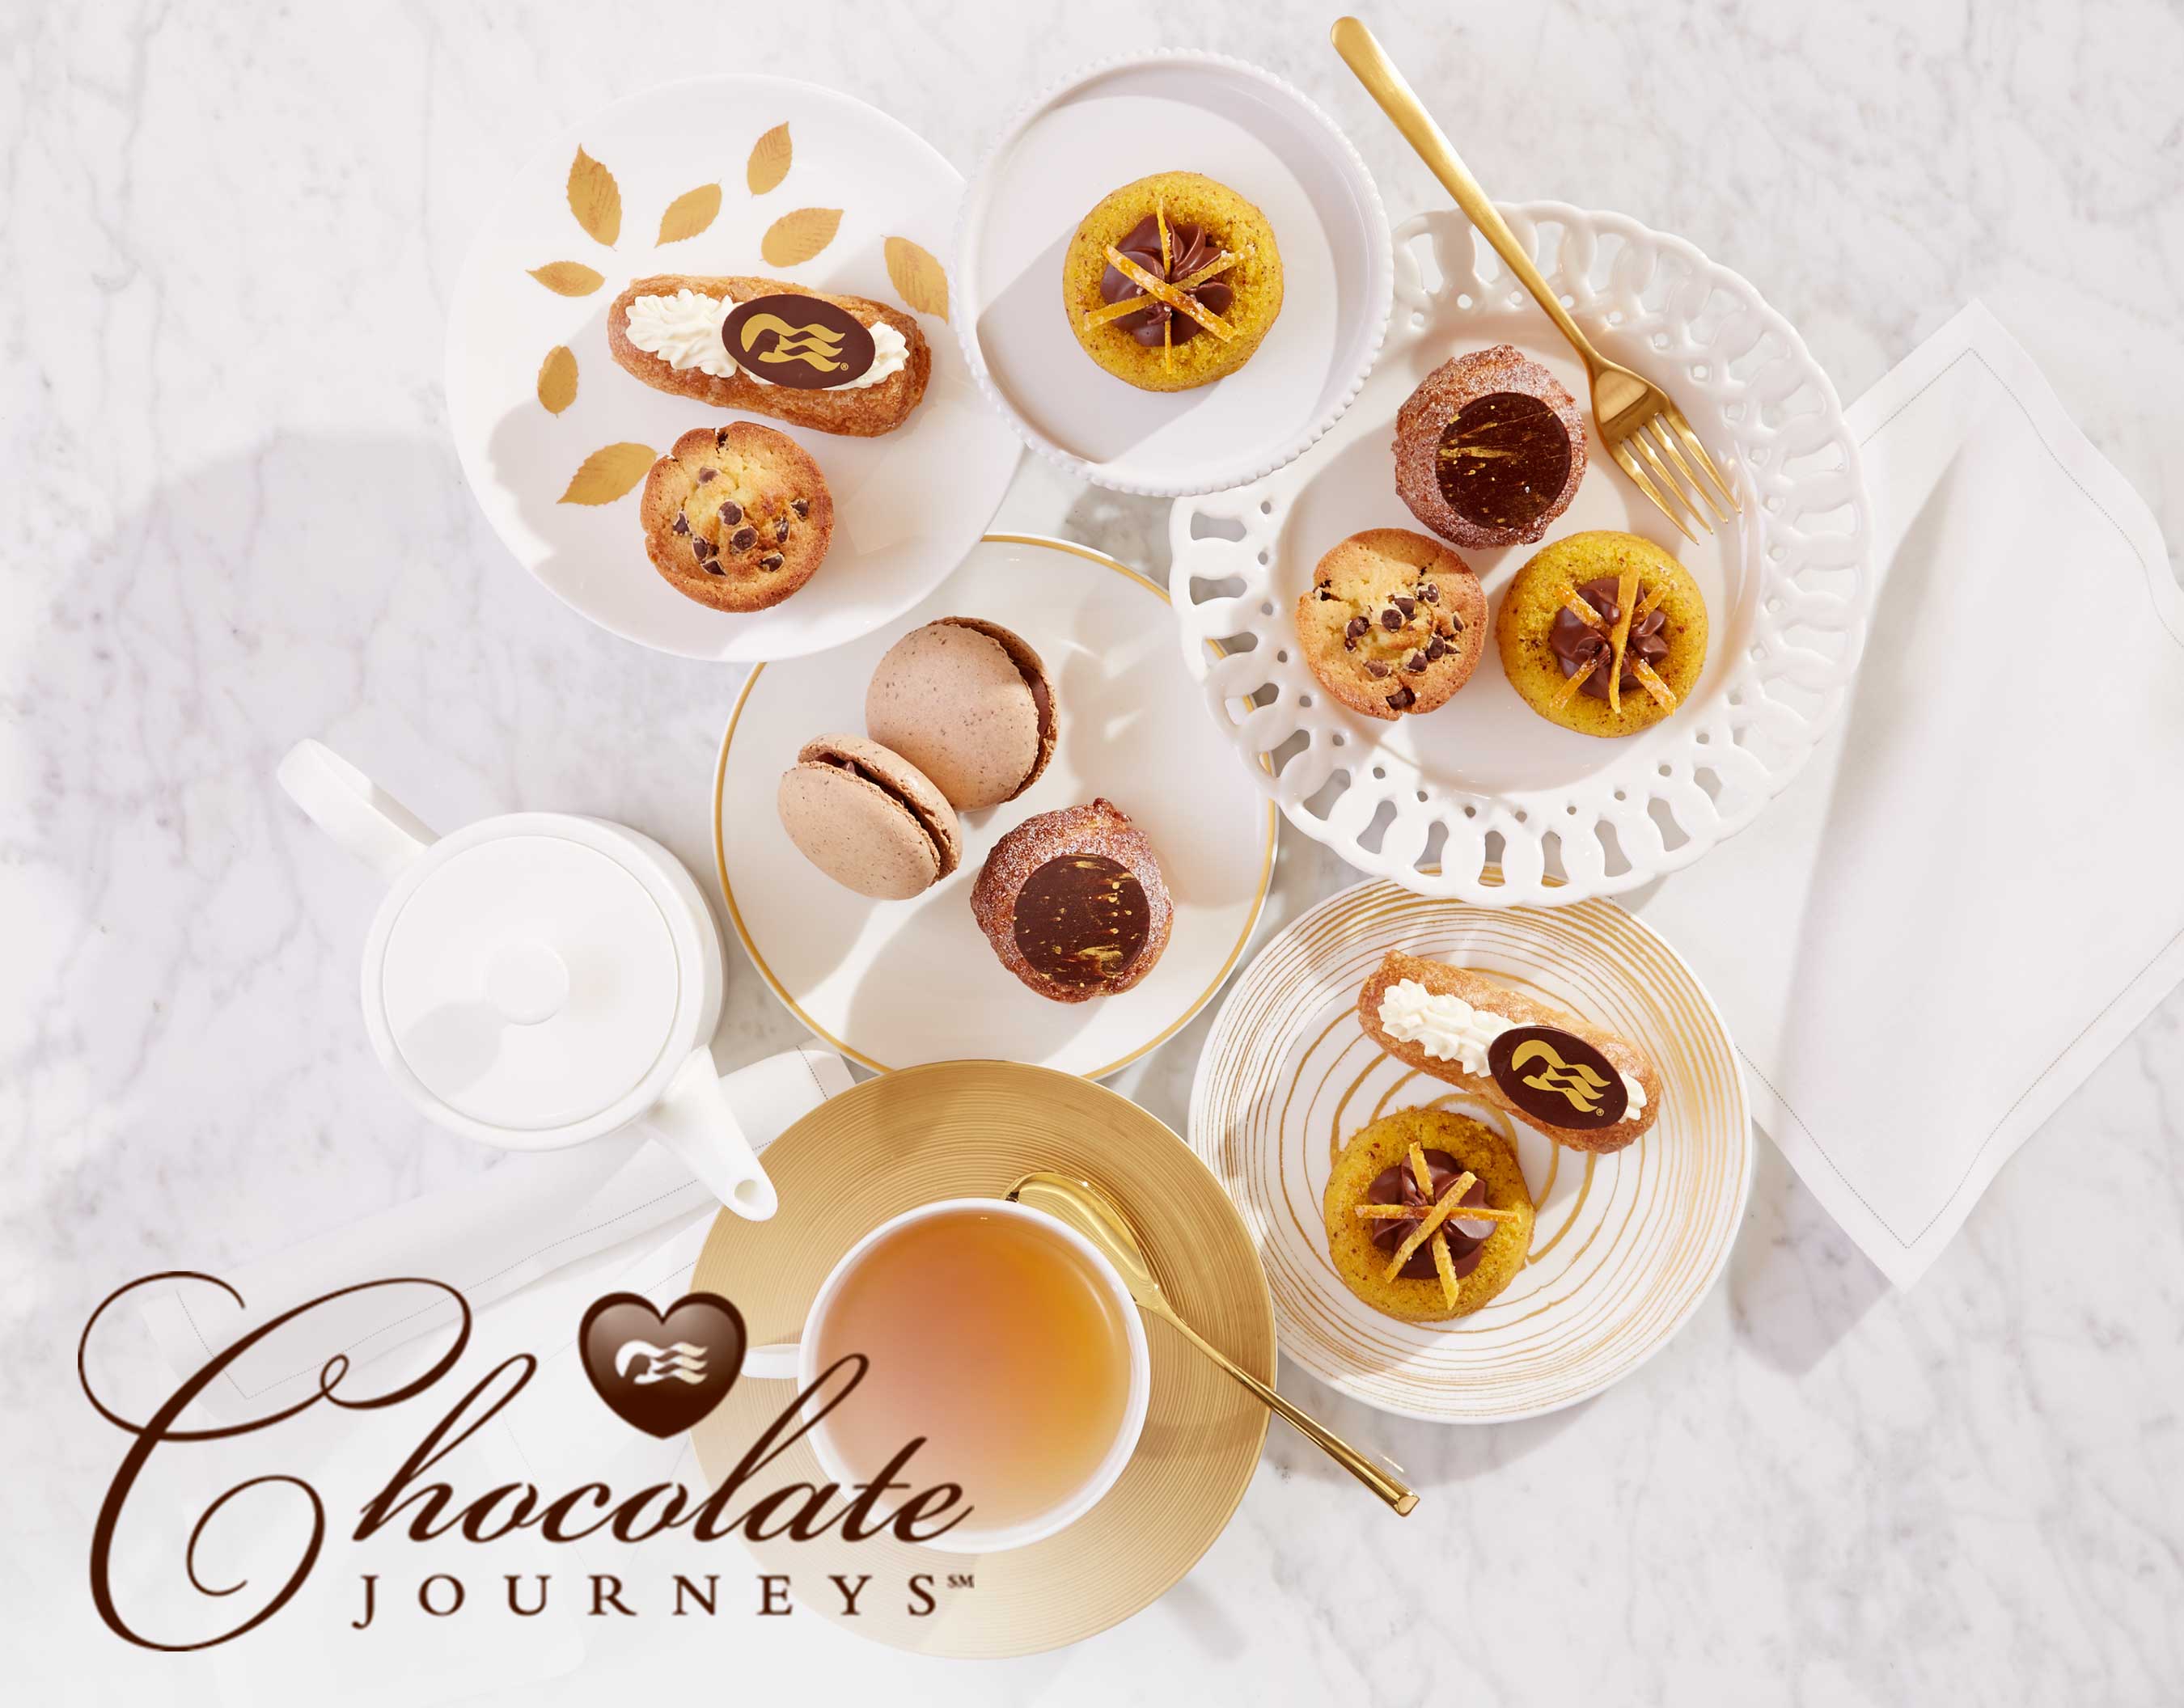 Princess Cruises sweetens "Chocolate Journeys" with new indulgences from Master Chocolatier Chef Norman Love.